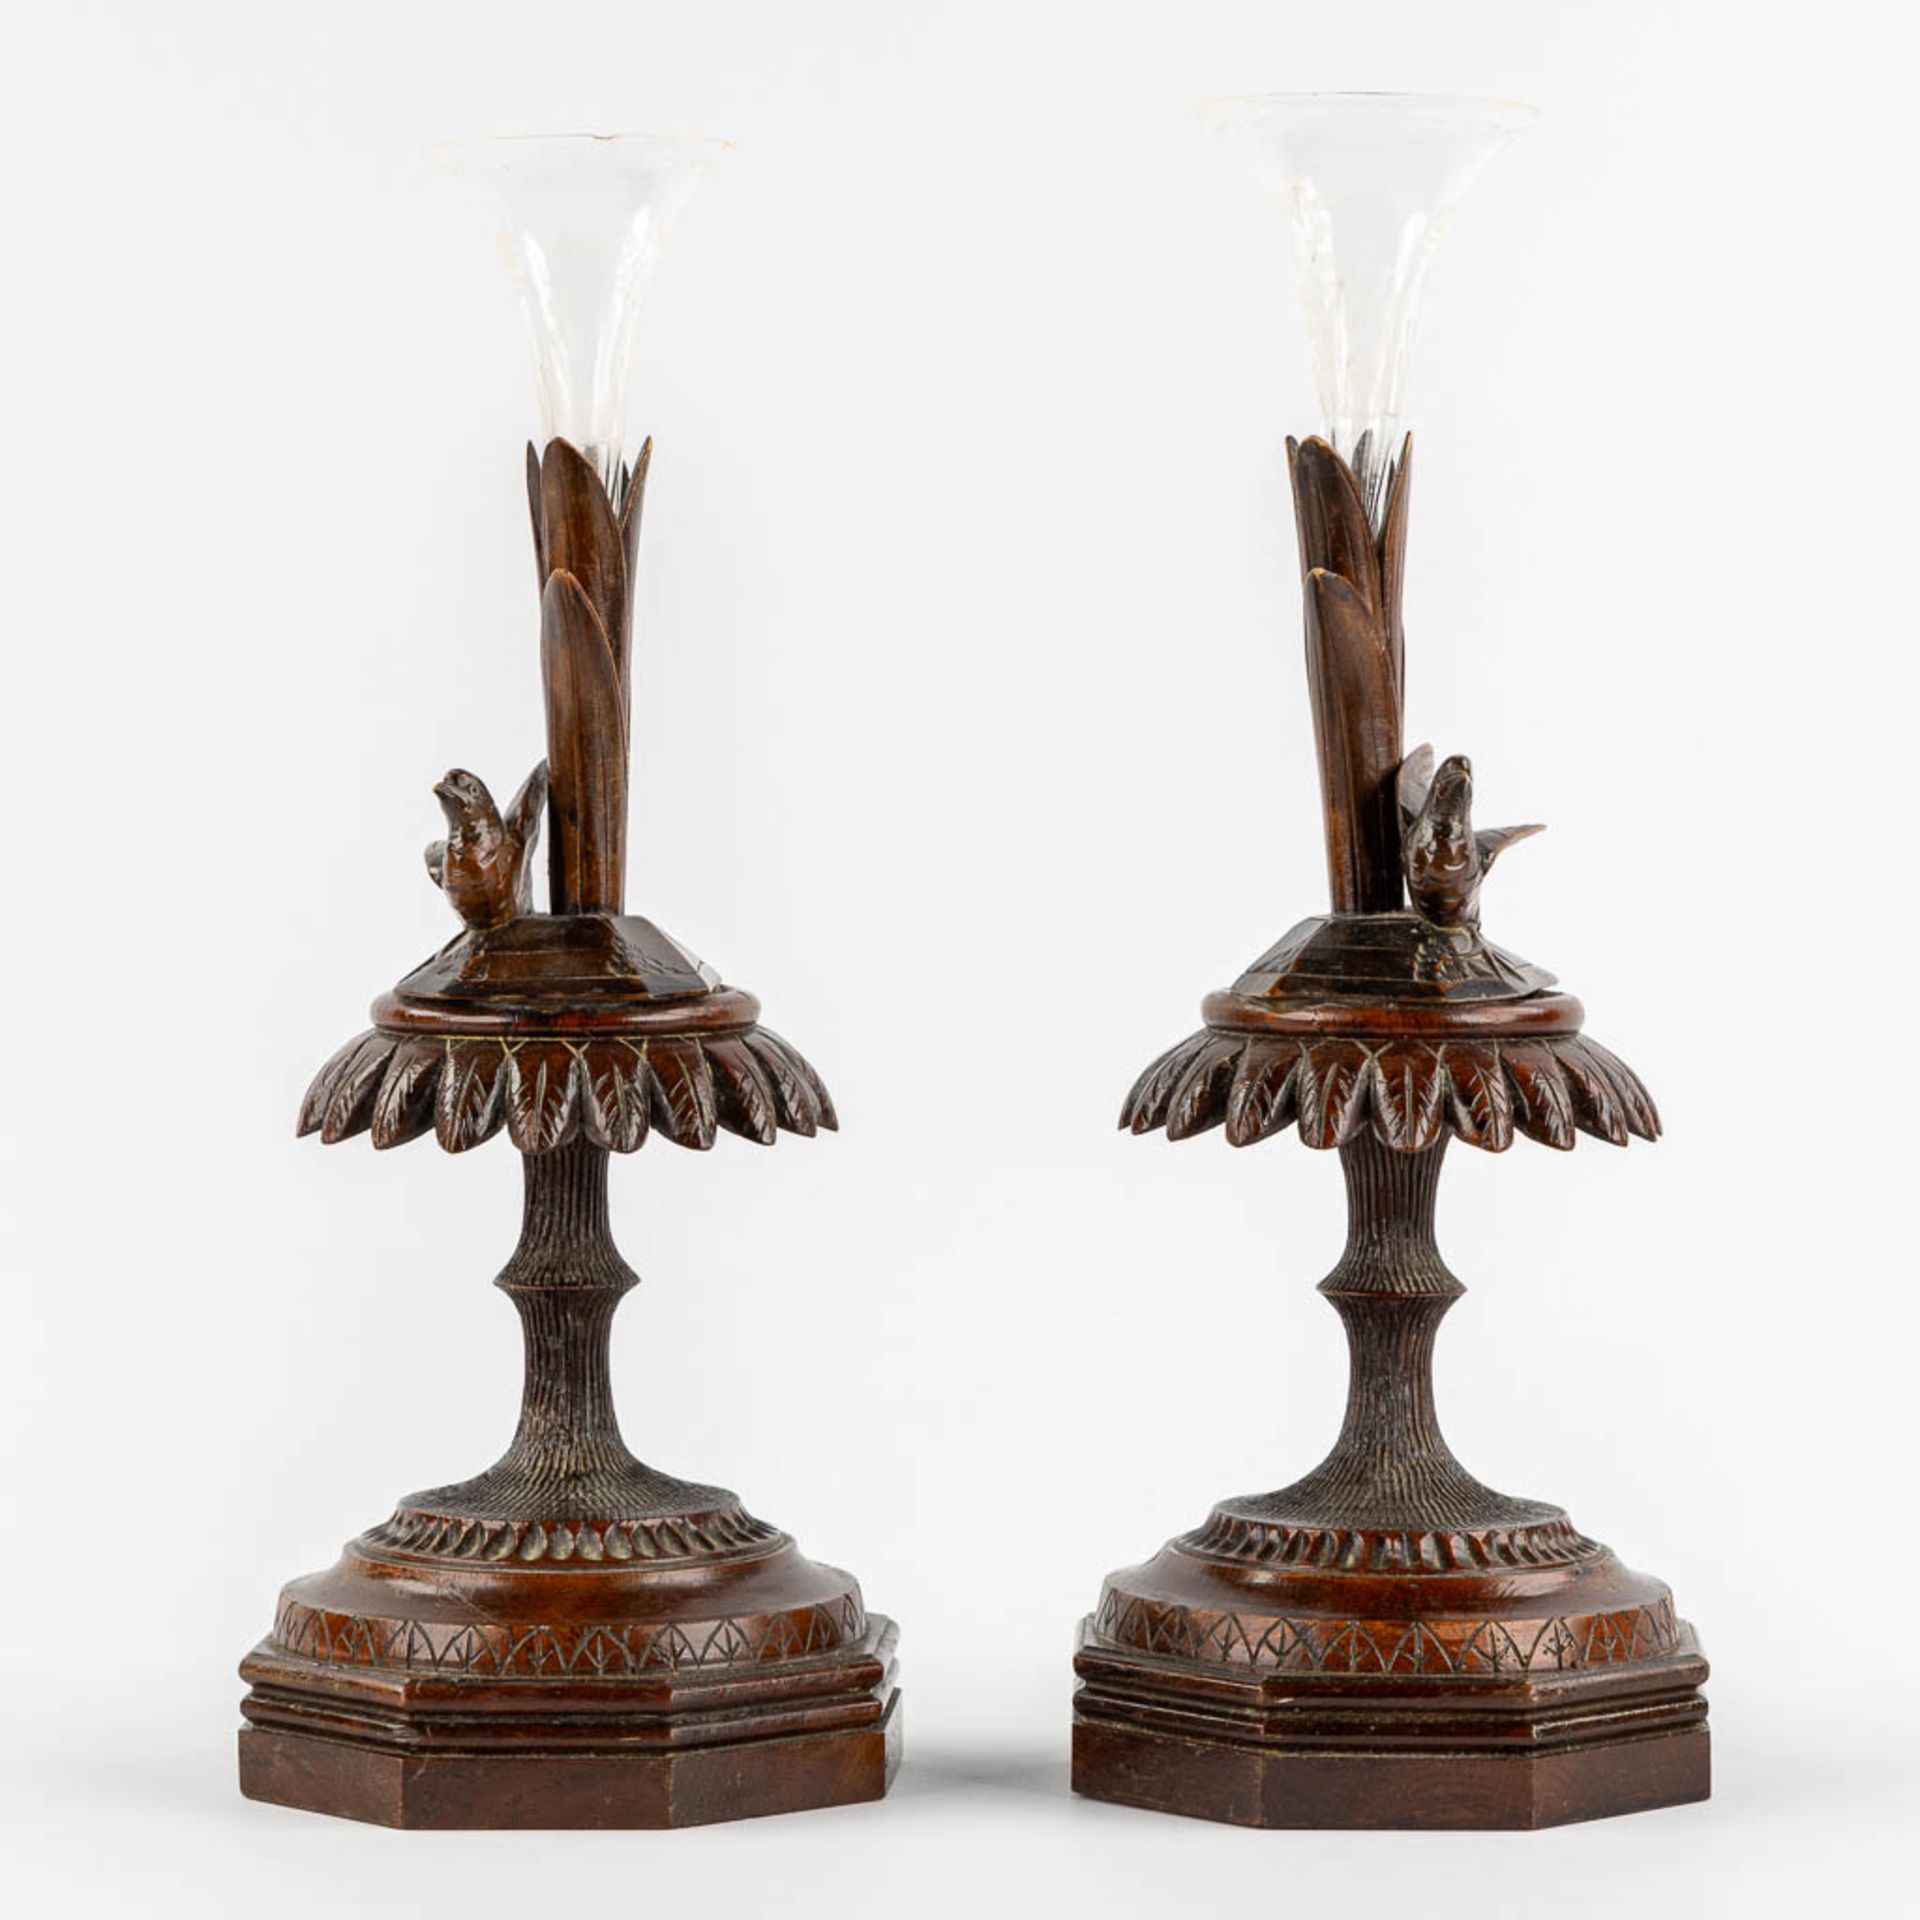 Two bases for Trumpet Vases, Schwartzwald or Black Forest. Circa 1880. (L:14,5 x W:14,5 x H:40 cm) - Image 4 of 11